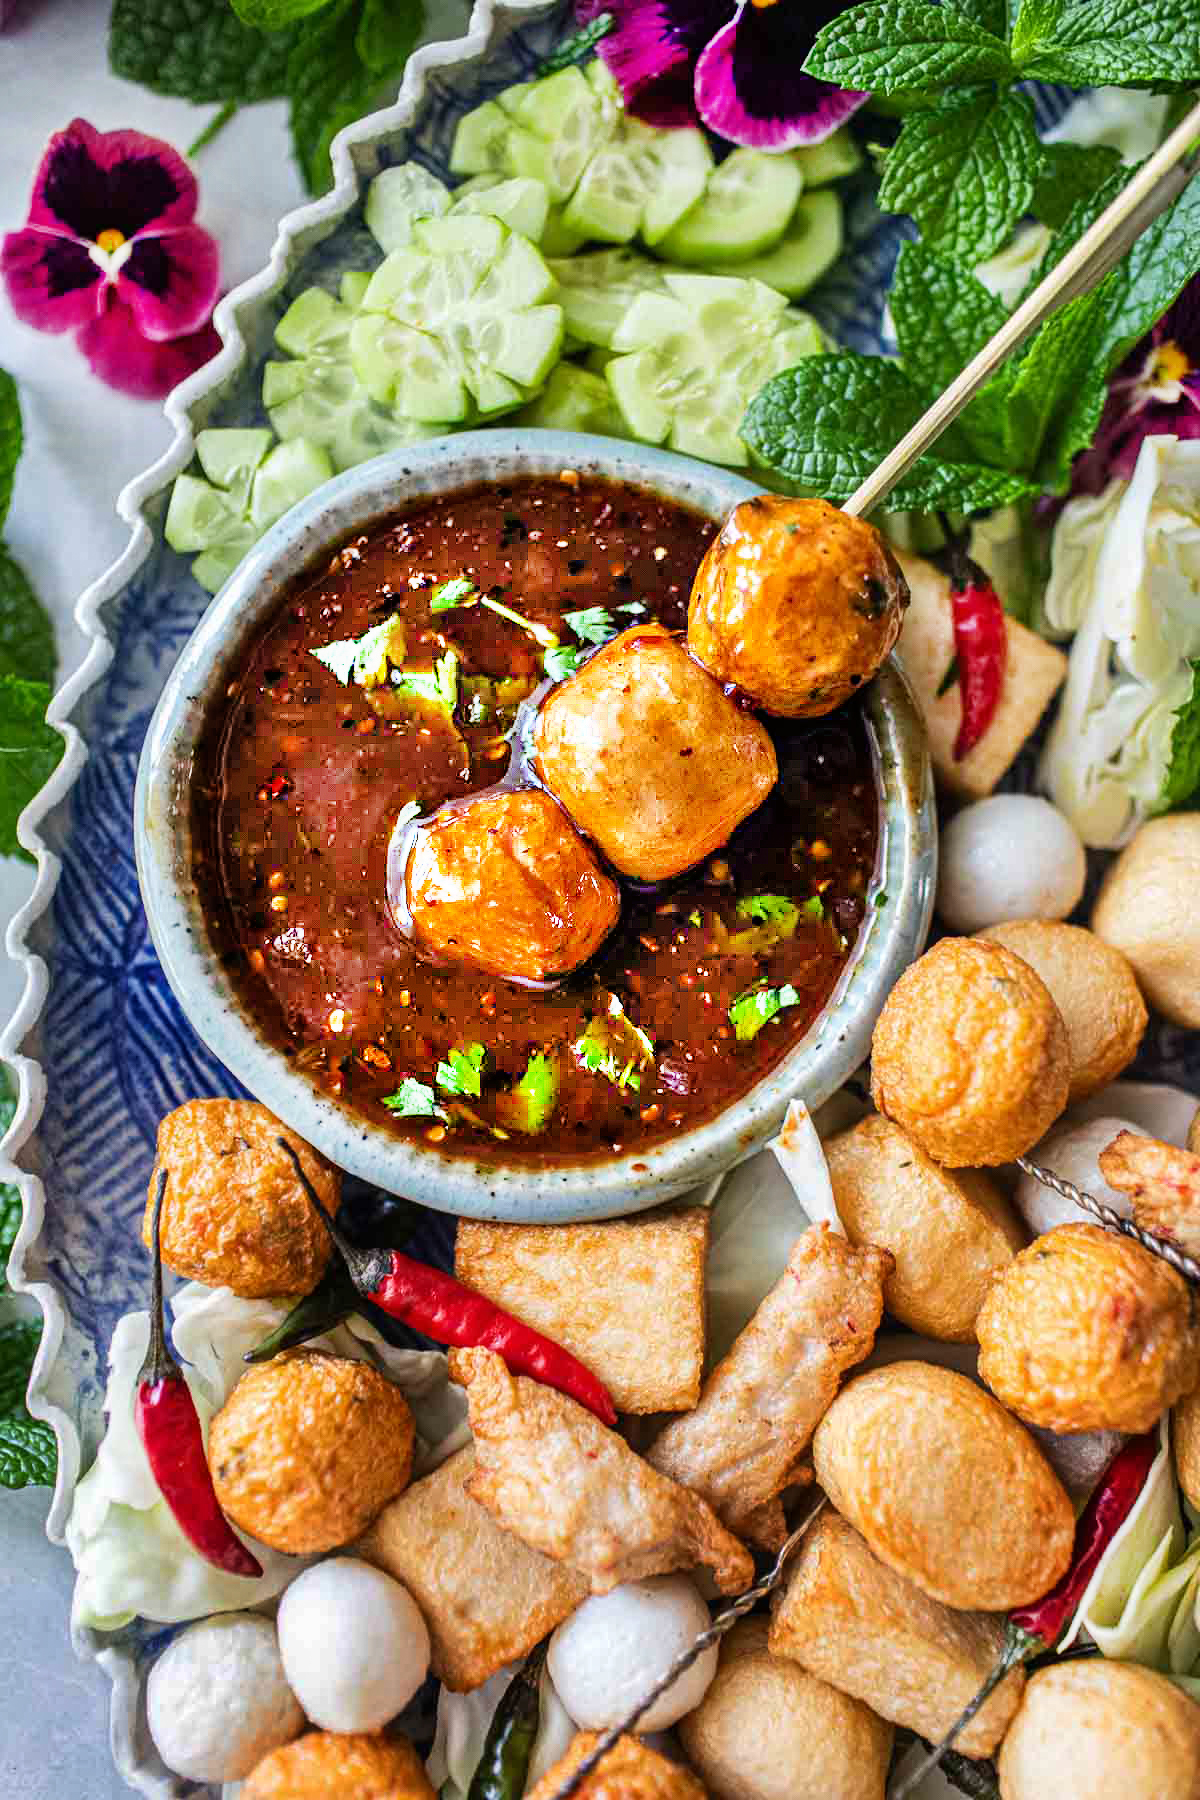 Tamarind sauce in a bowl with meatballs around on the platter.